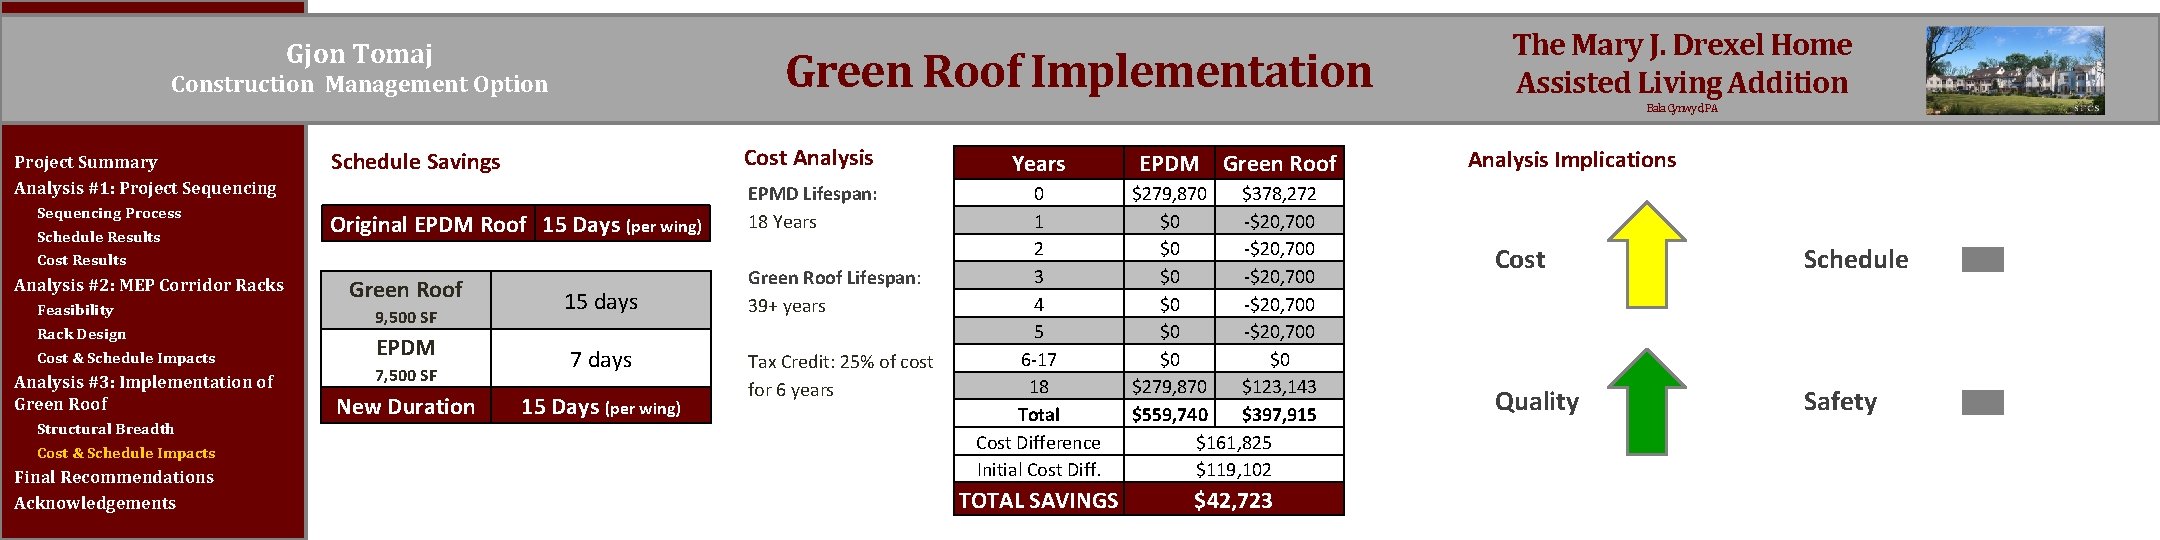 Gjon Tomaj Green Roof Implementation Construction Management Option The Mary J. Drexel Home Assisted